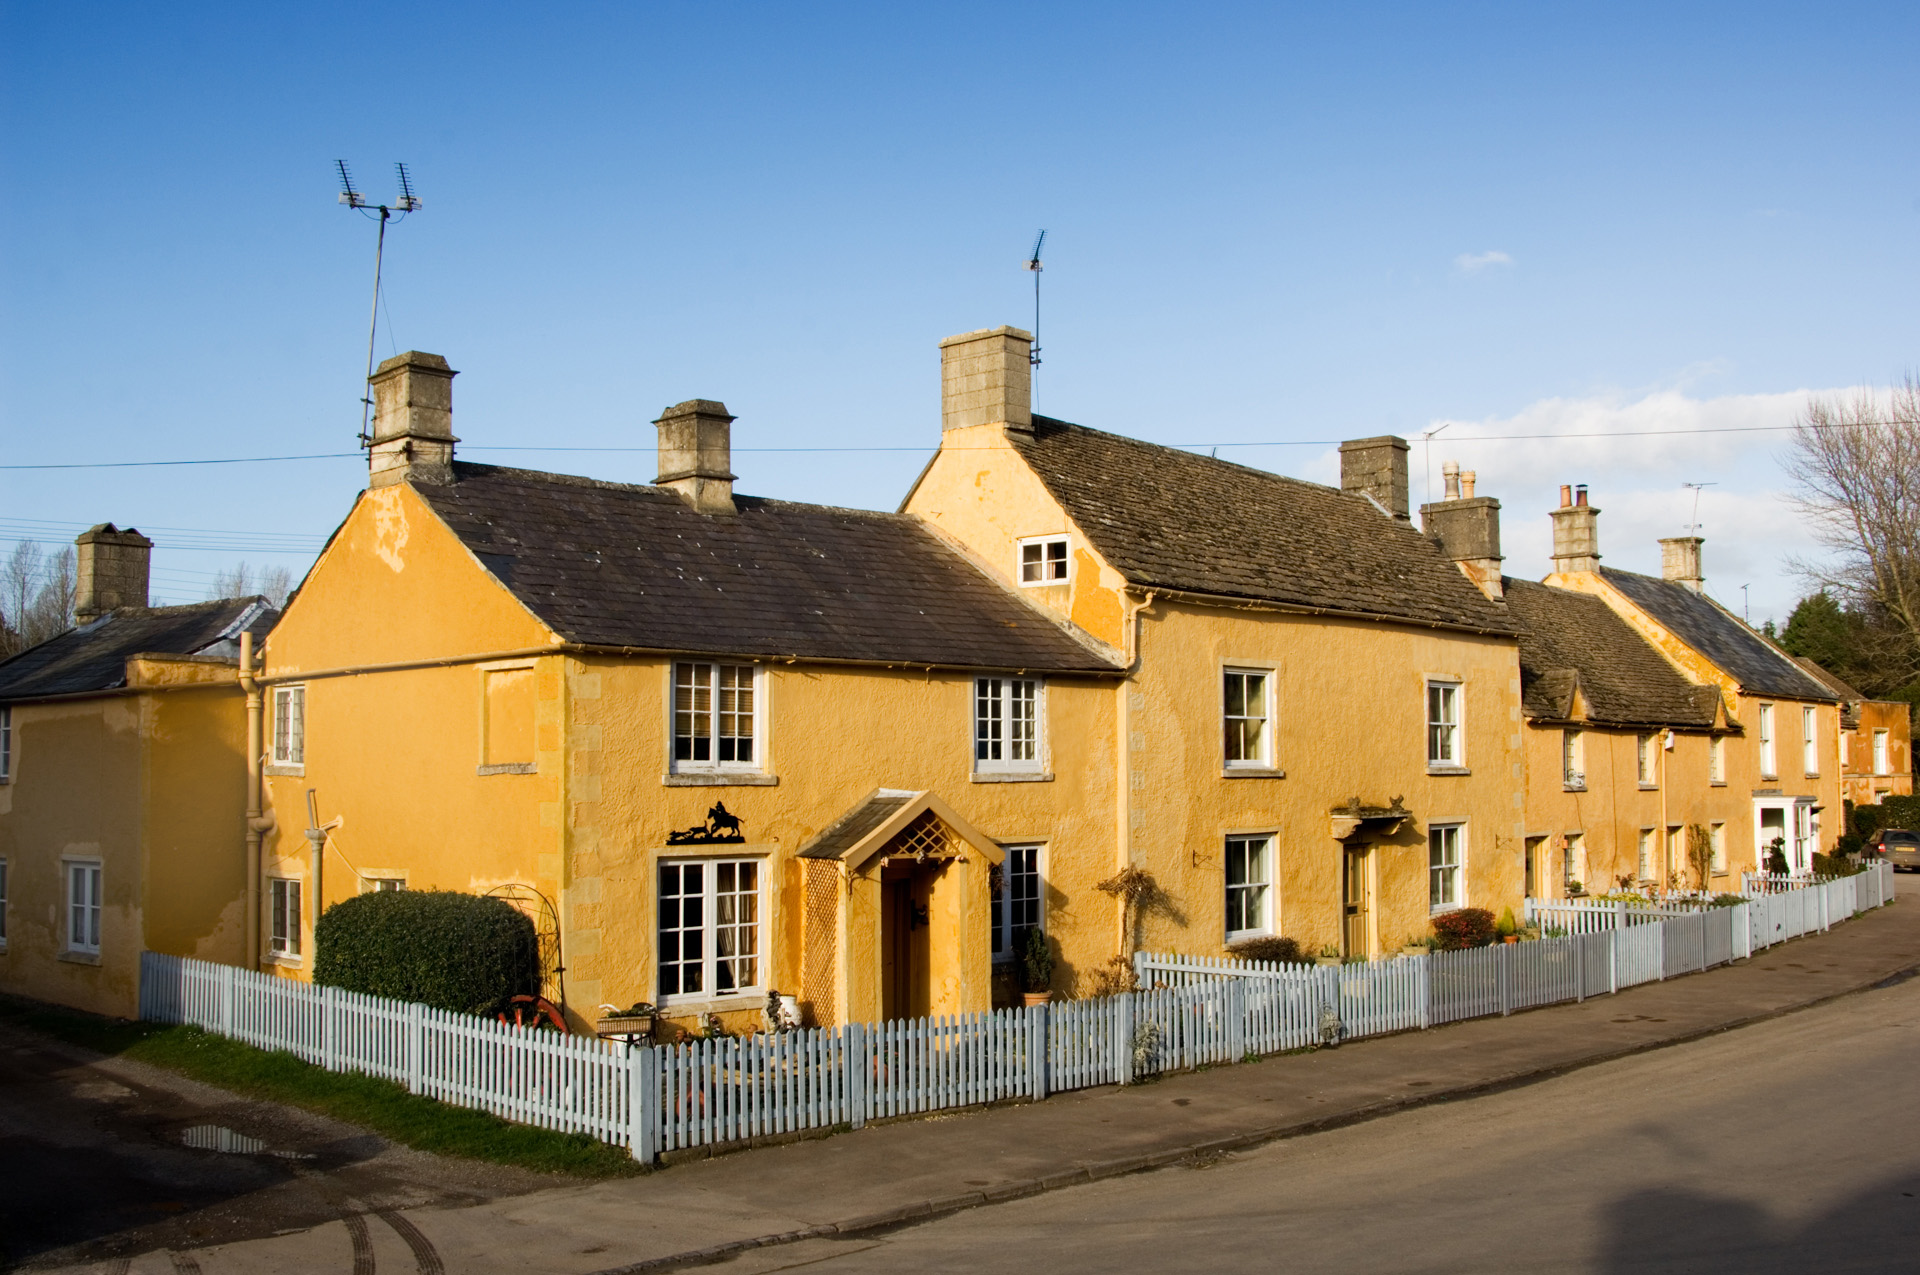 High Street, Badminton, Gloucestershire.  General view of cottages with uniform limewash.